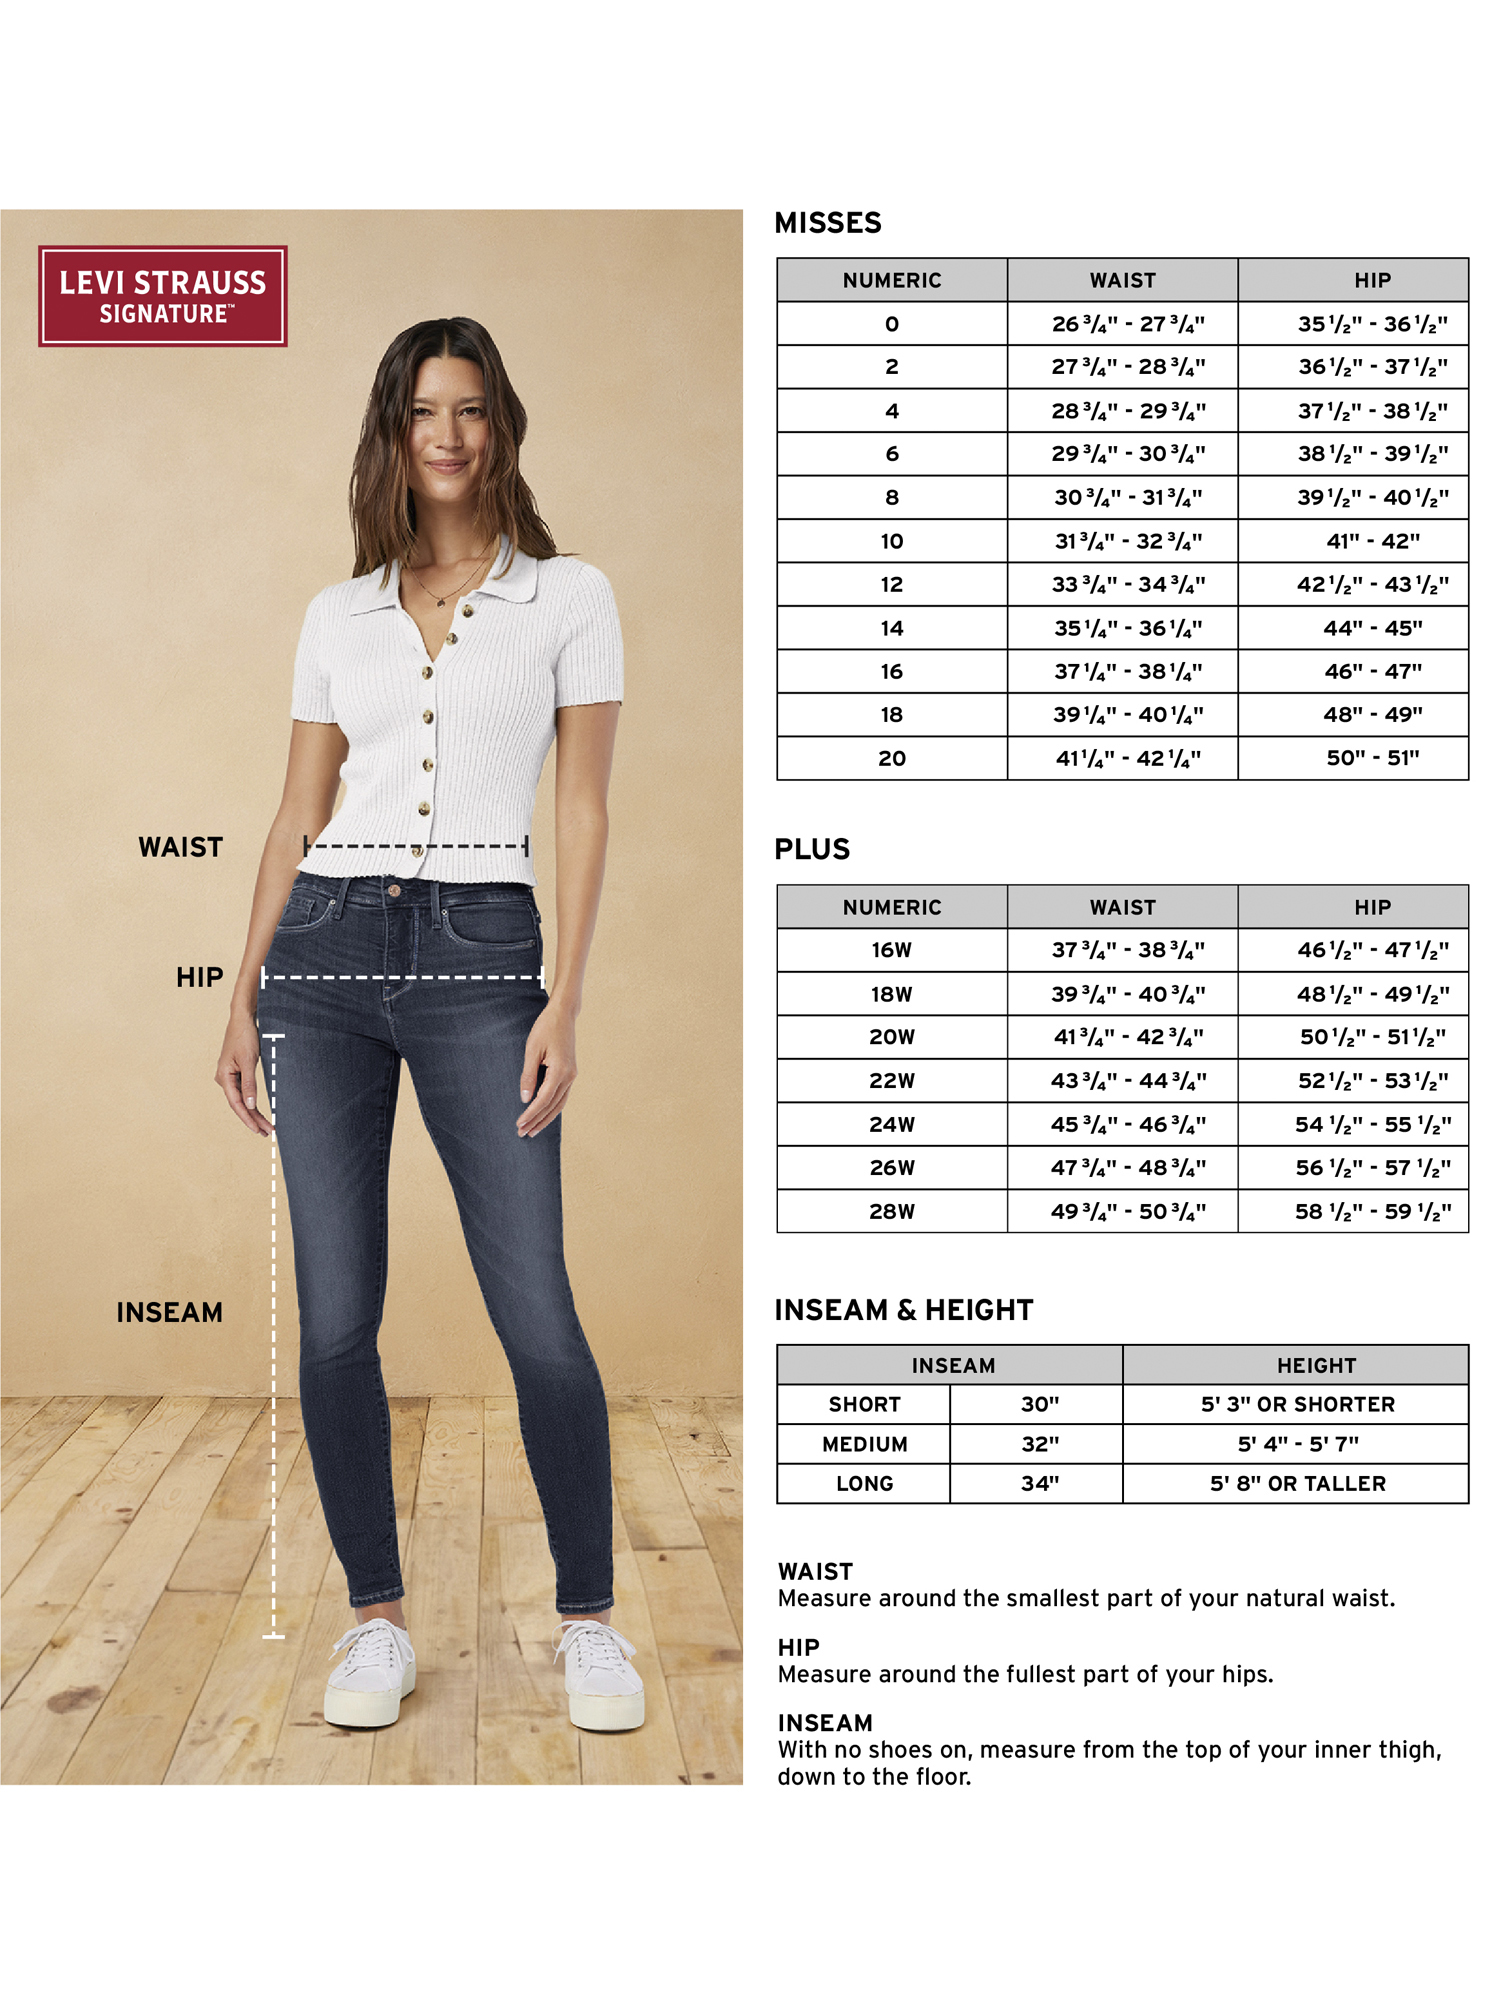 Signature by Levi Strauss & Co. Women's Simply Stretch Shaping Pull-On Super Skinny Jeans - image 5 of 6